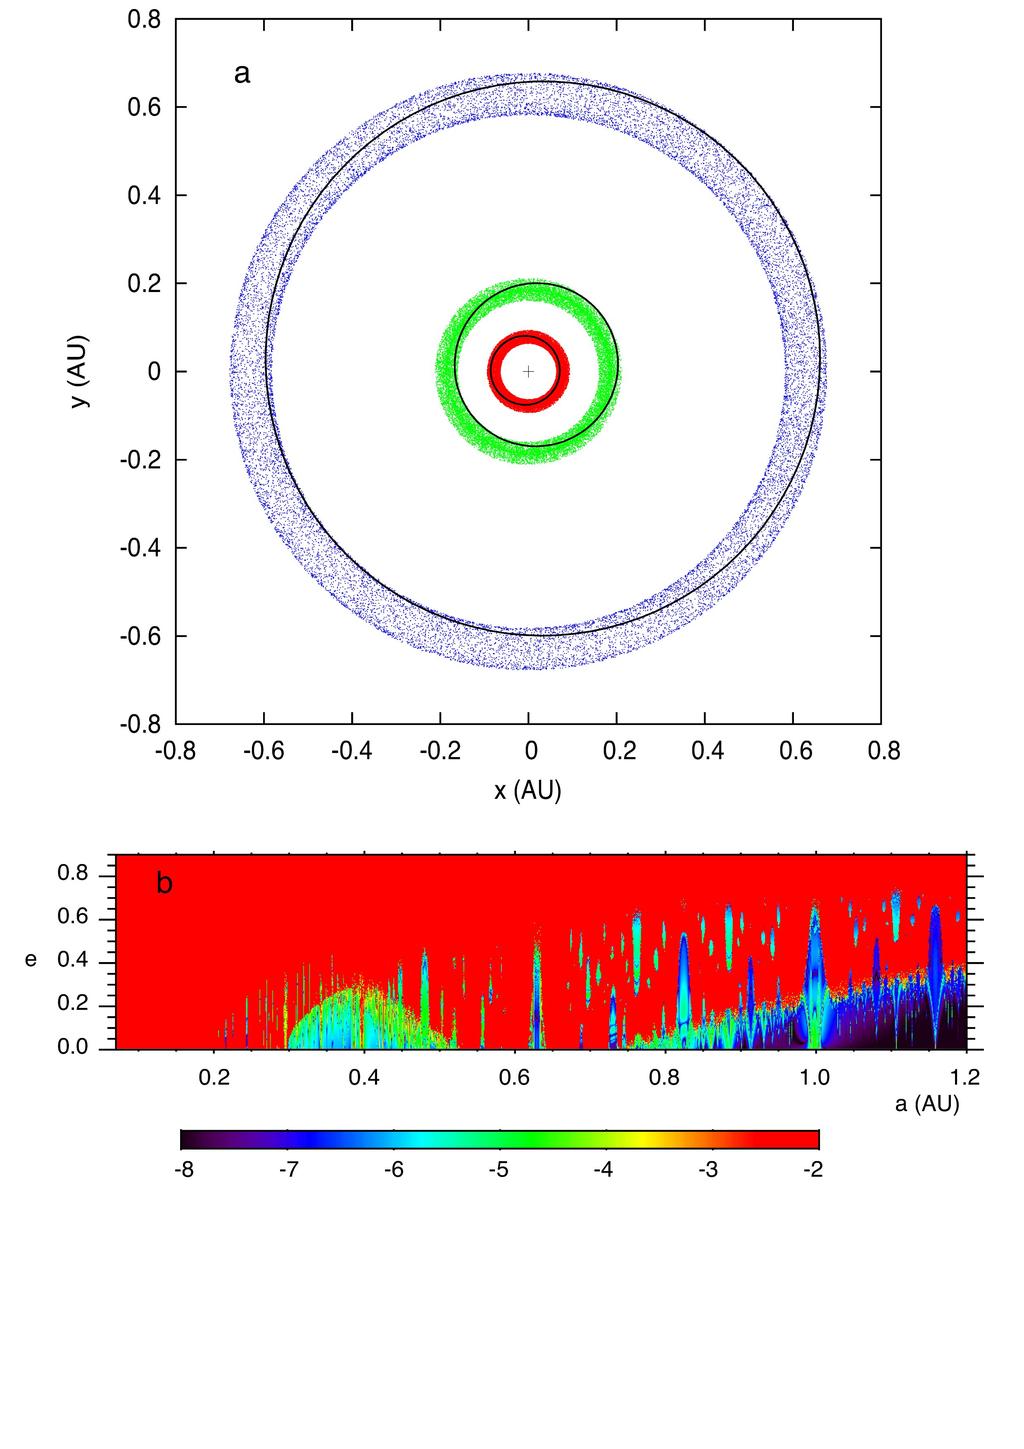 D 69830 Simulations - real asteroseismology observations -> noise model => synthetic observations >>>>> 0.35 m/" On 4 seasons.